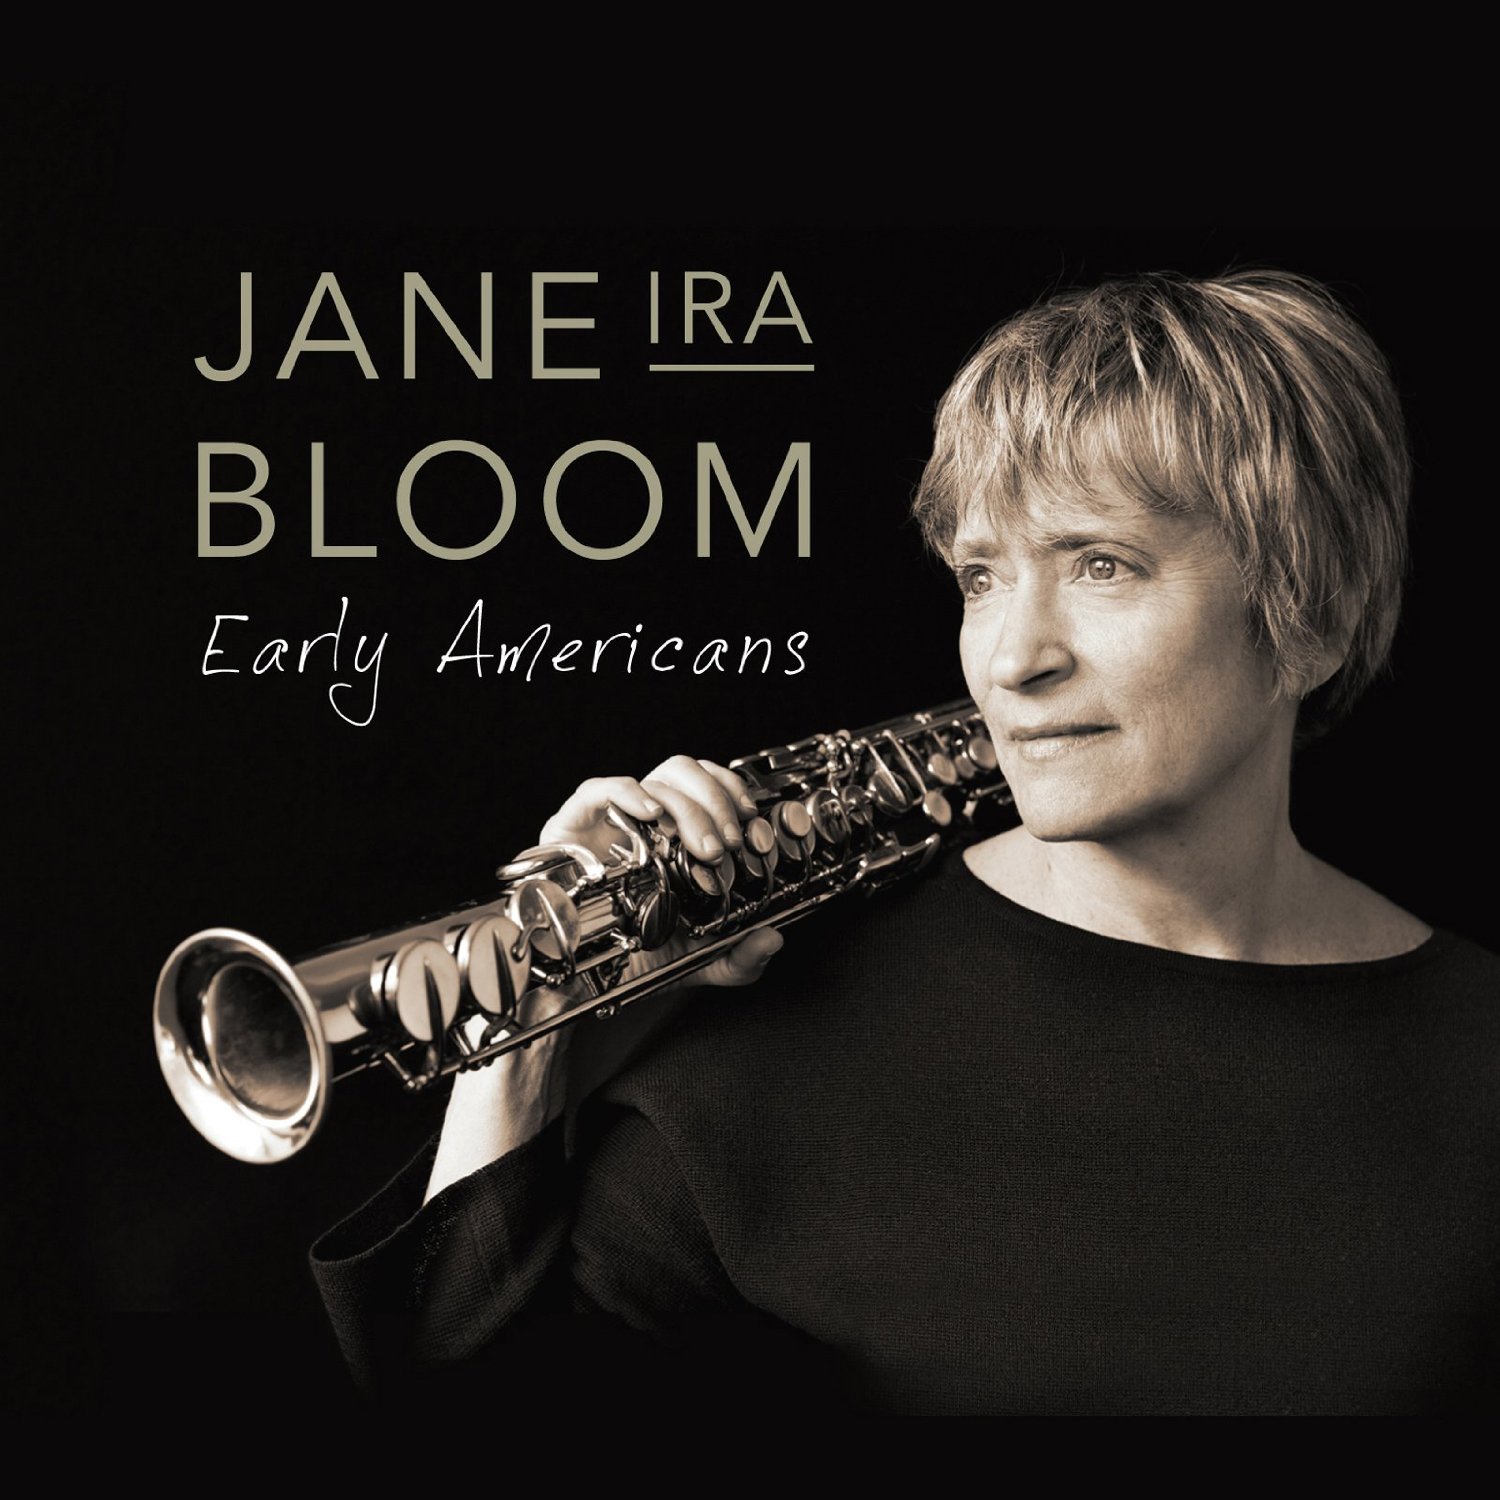 JANE IRA BLOOM - Early Americans cover 